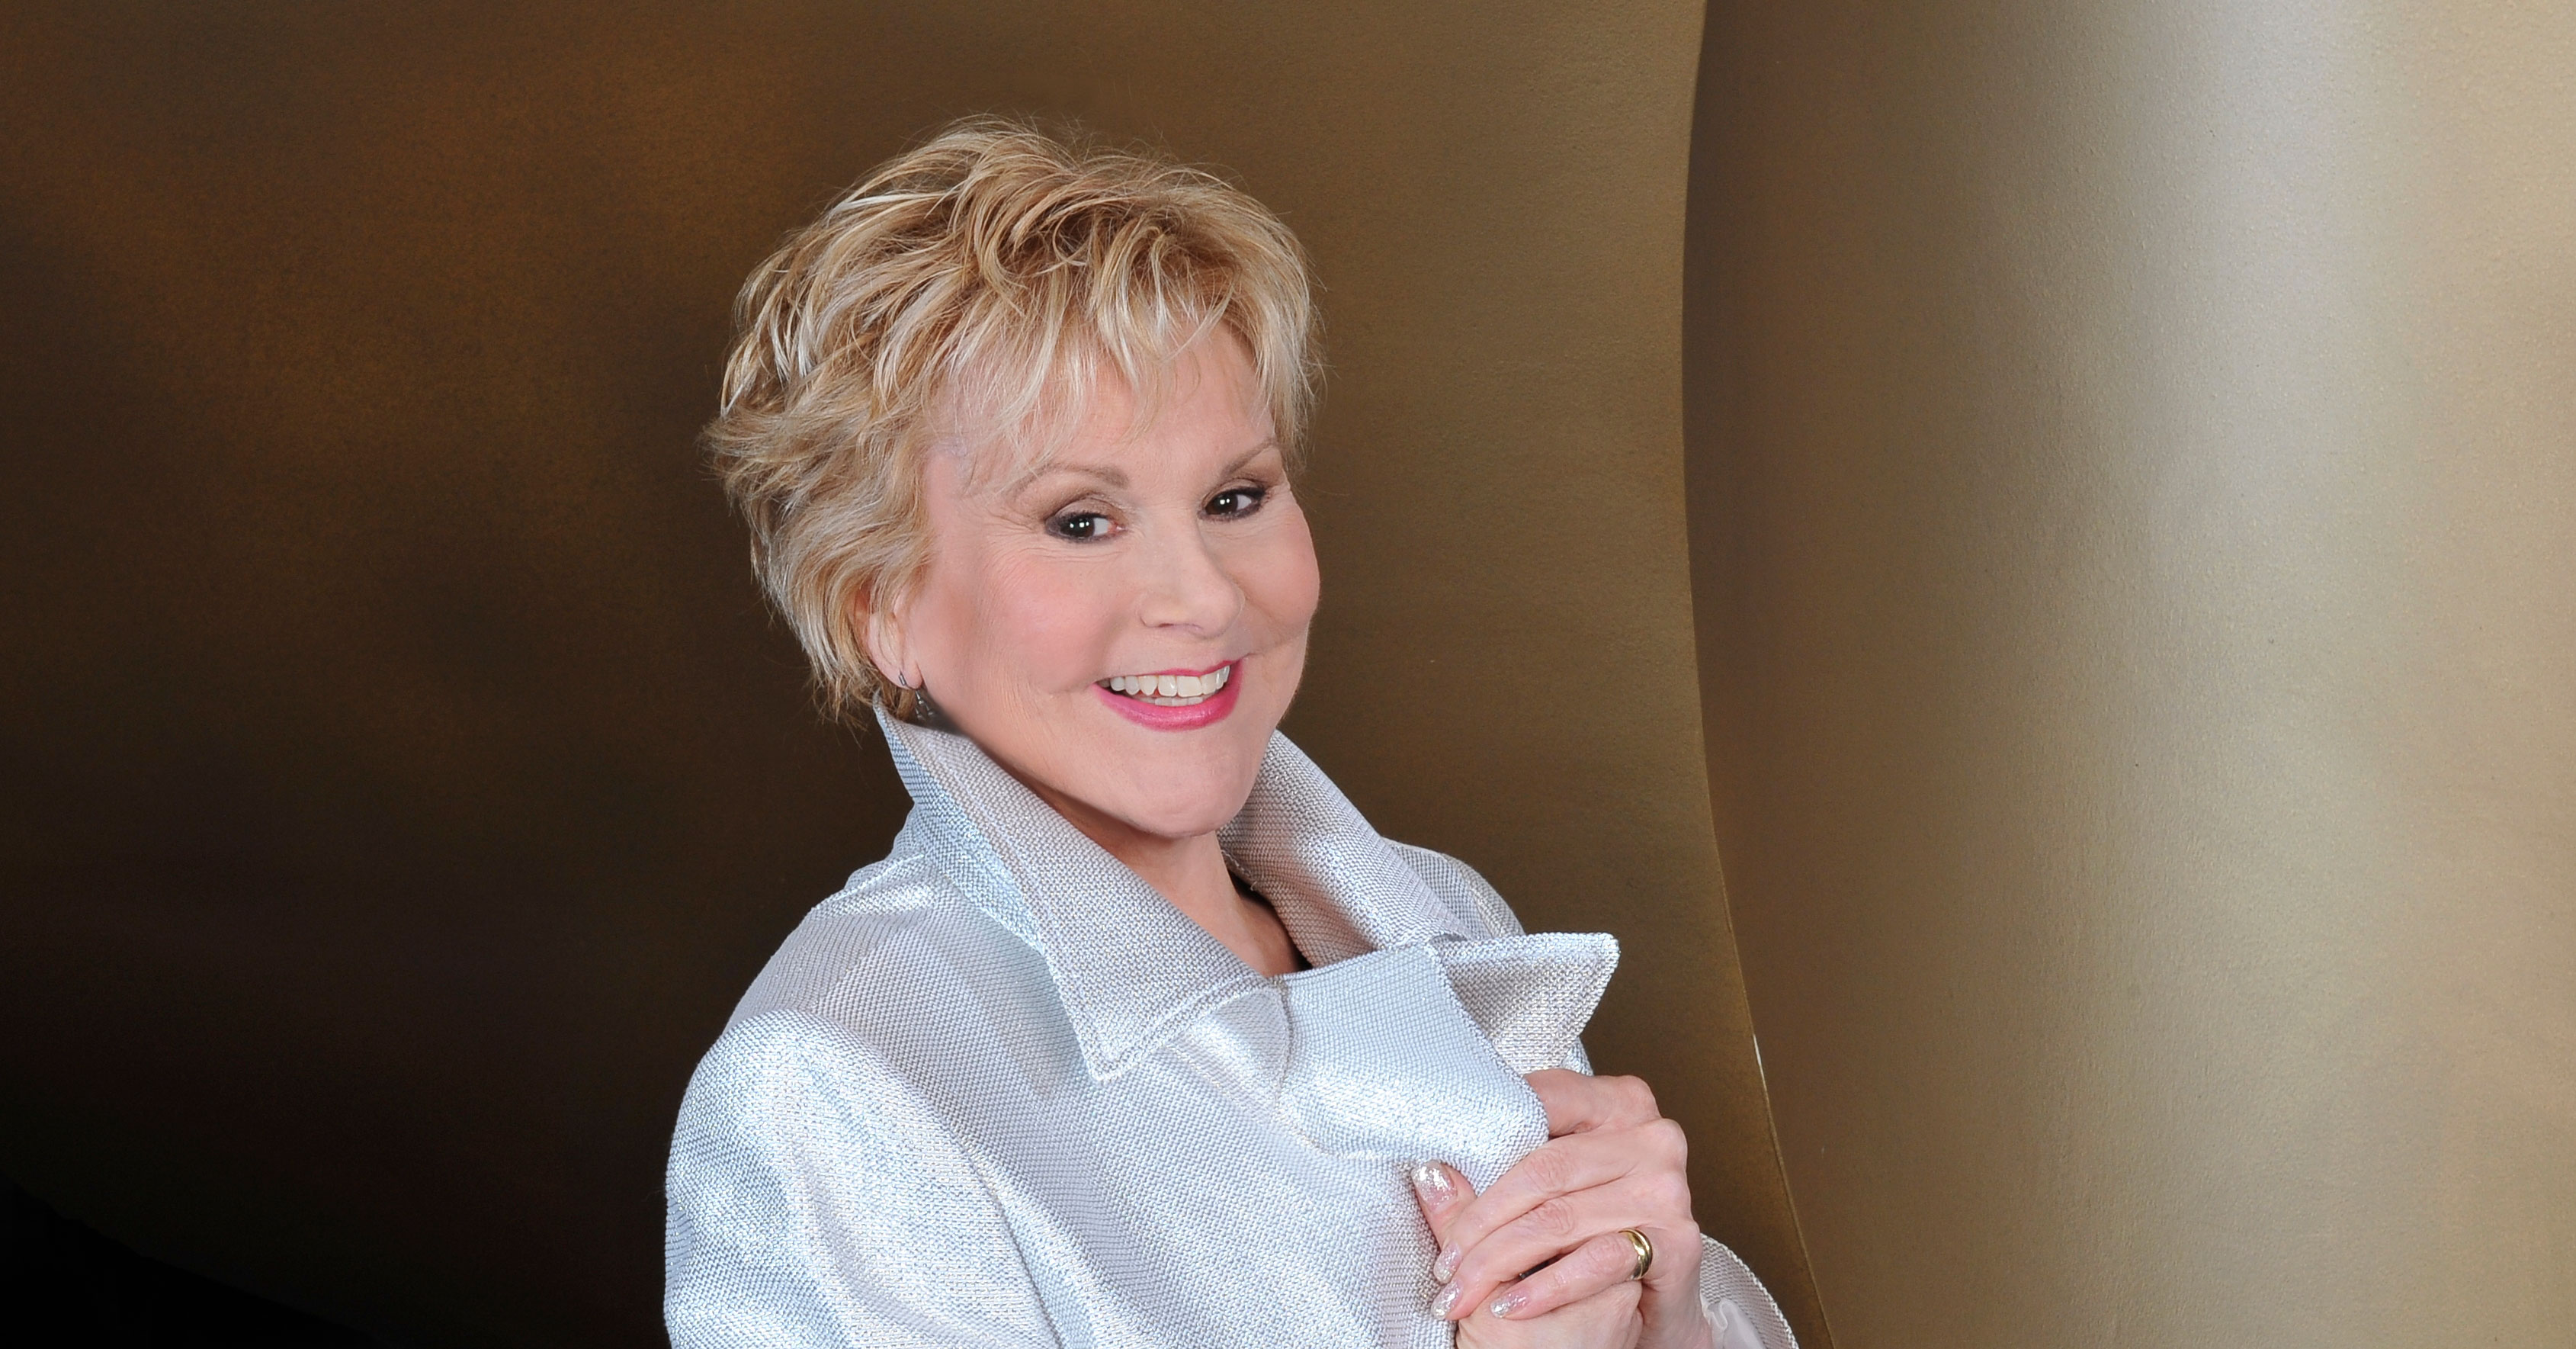 Peggy march net worth